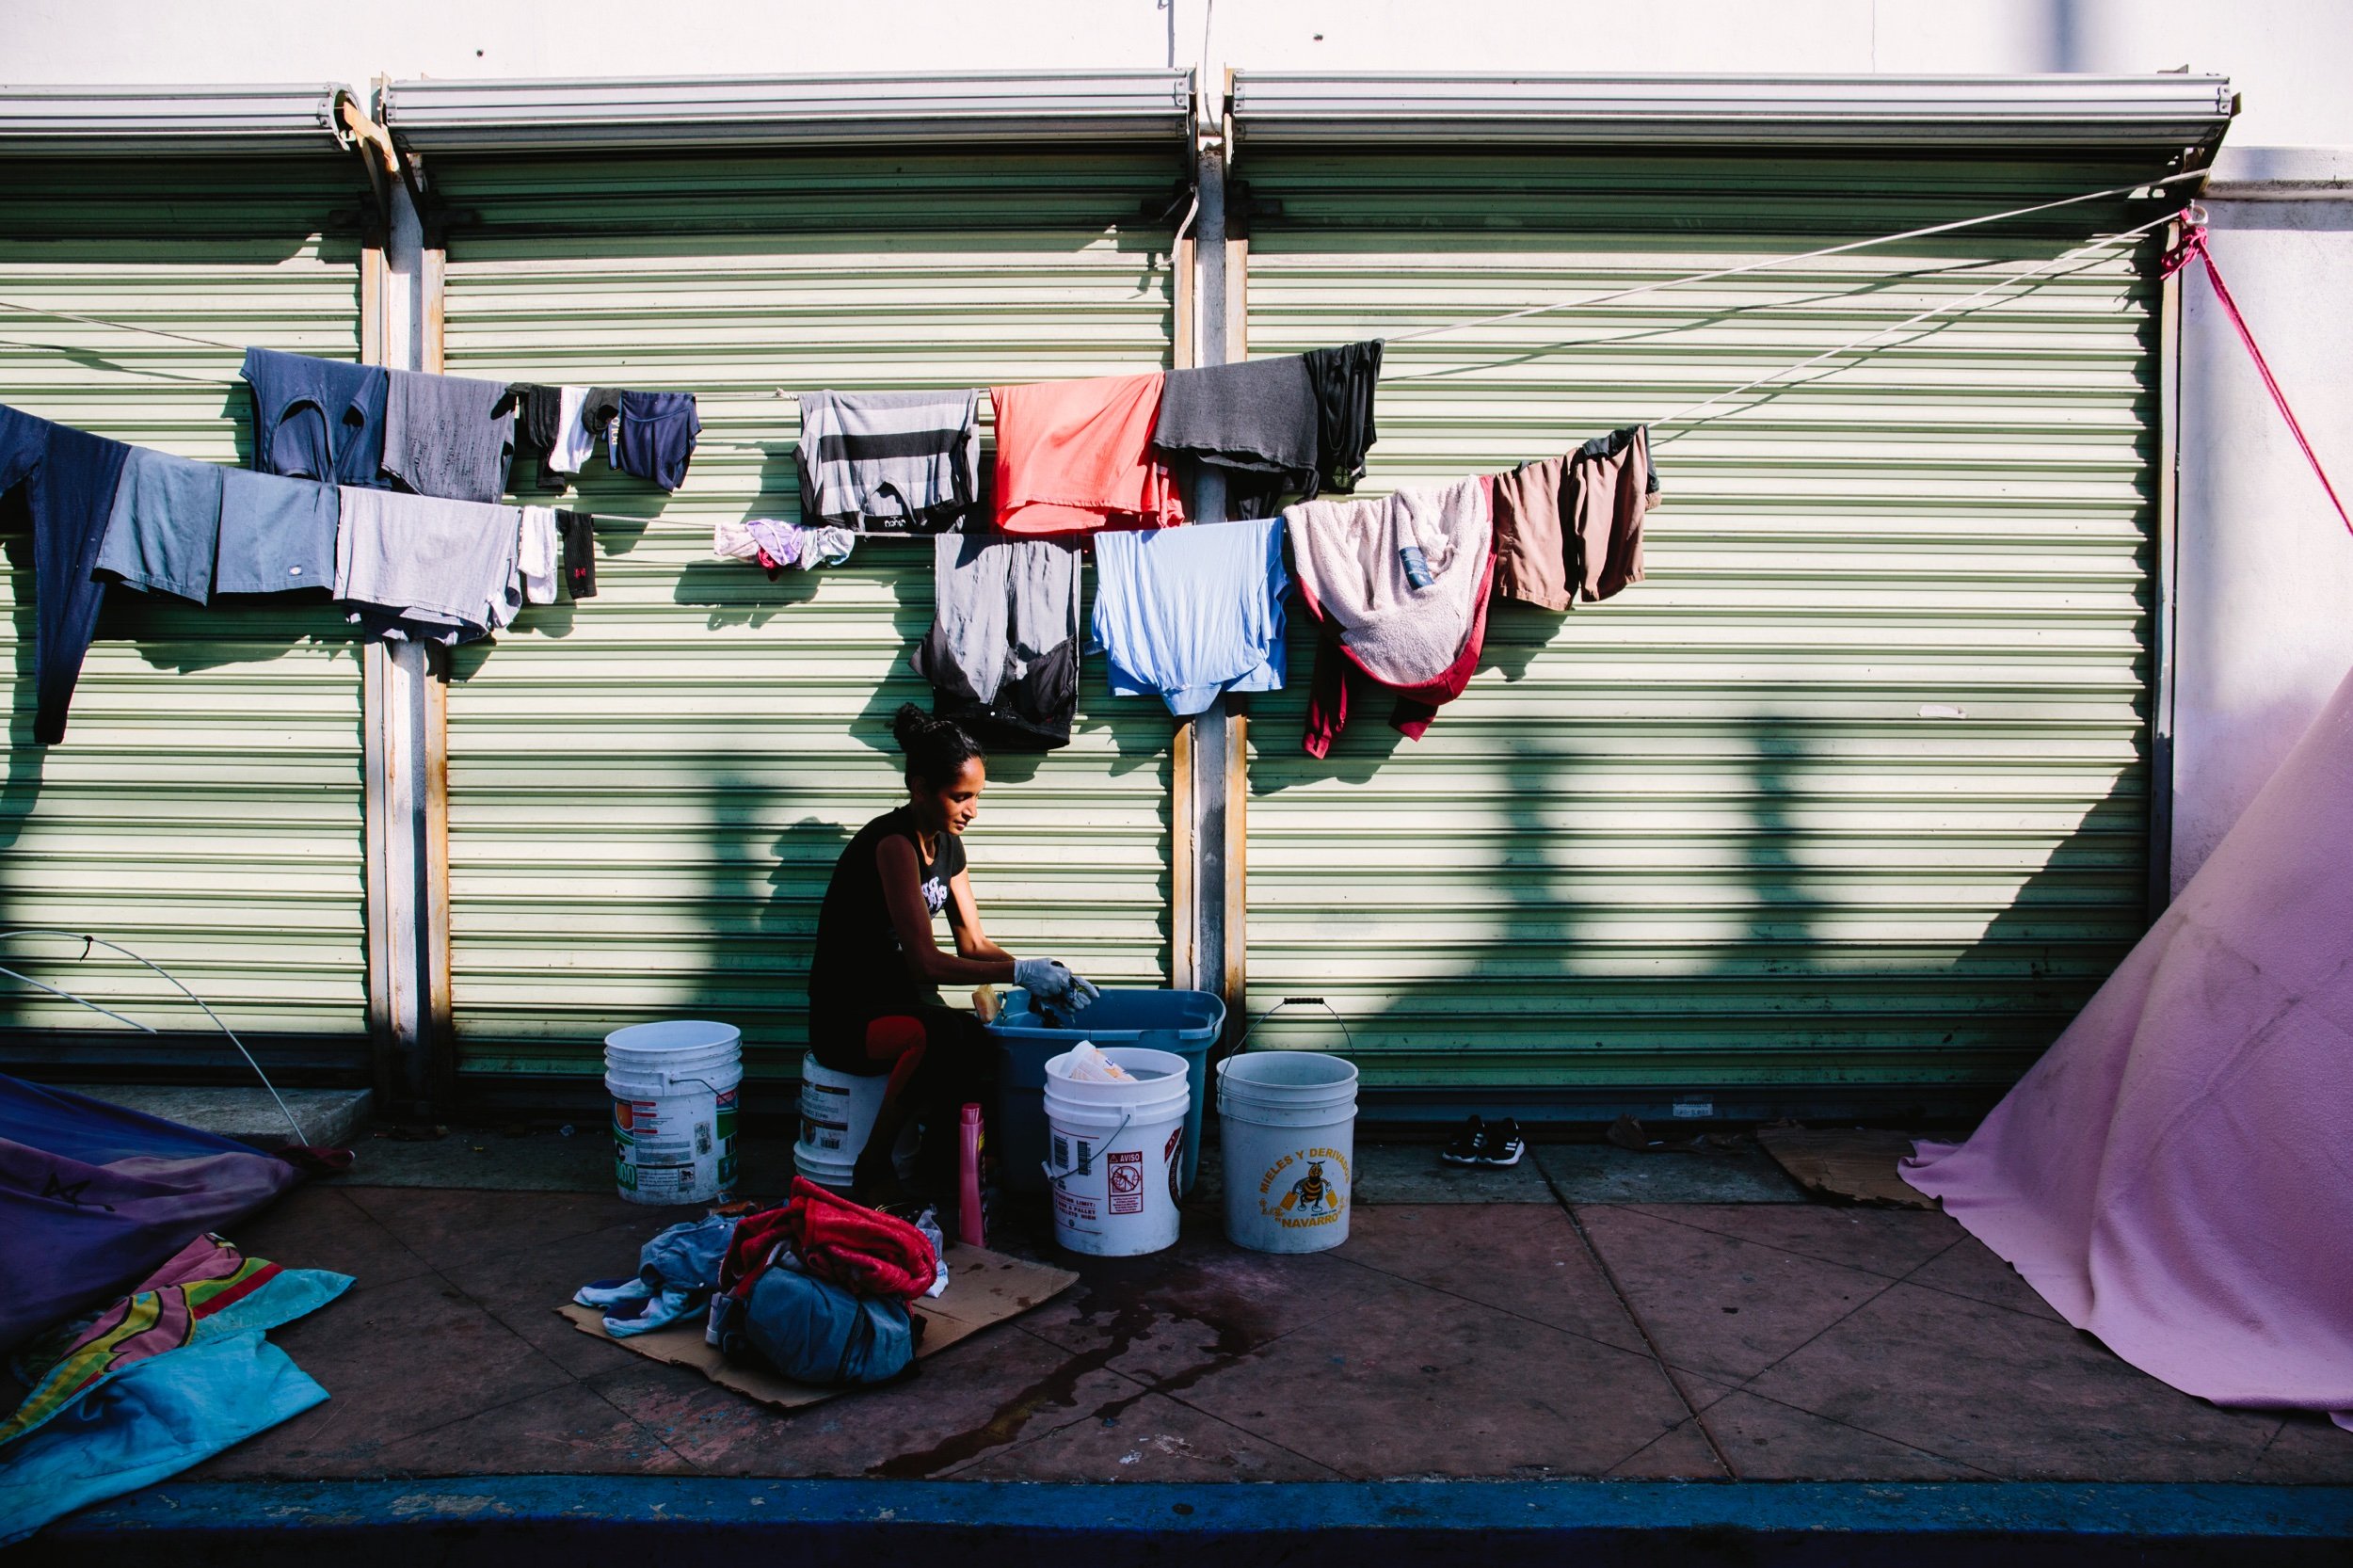  A woman washes and hangs laundry to dry in el Chaparral migrant camp. Tijuana, Mexico. June 2021. 